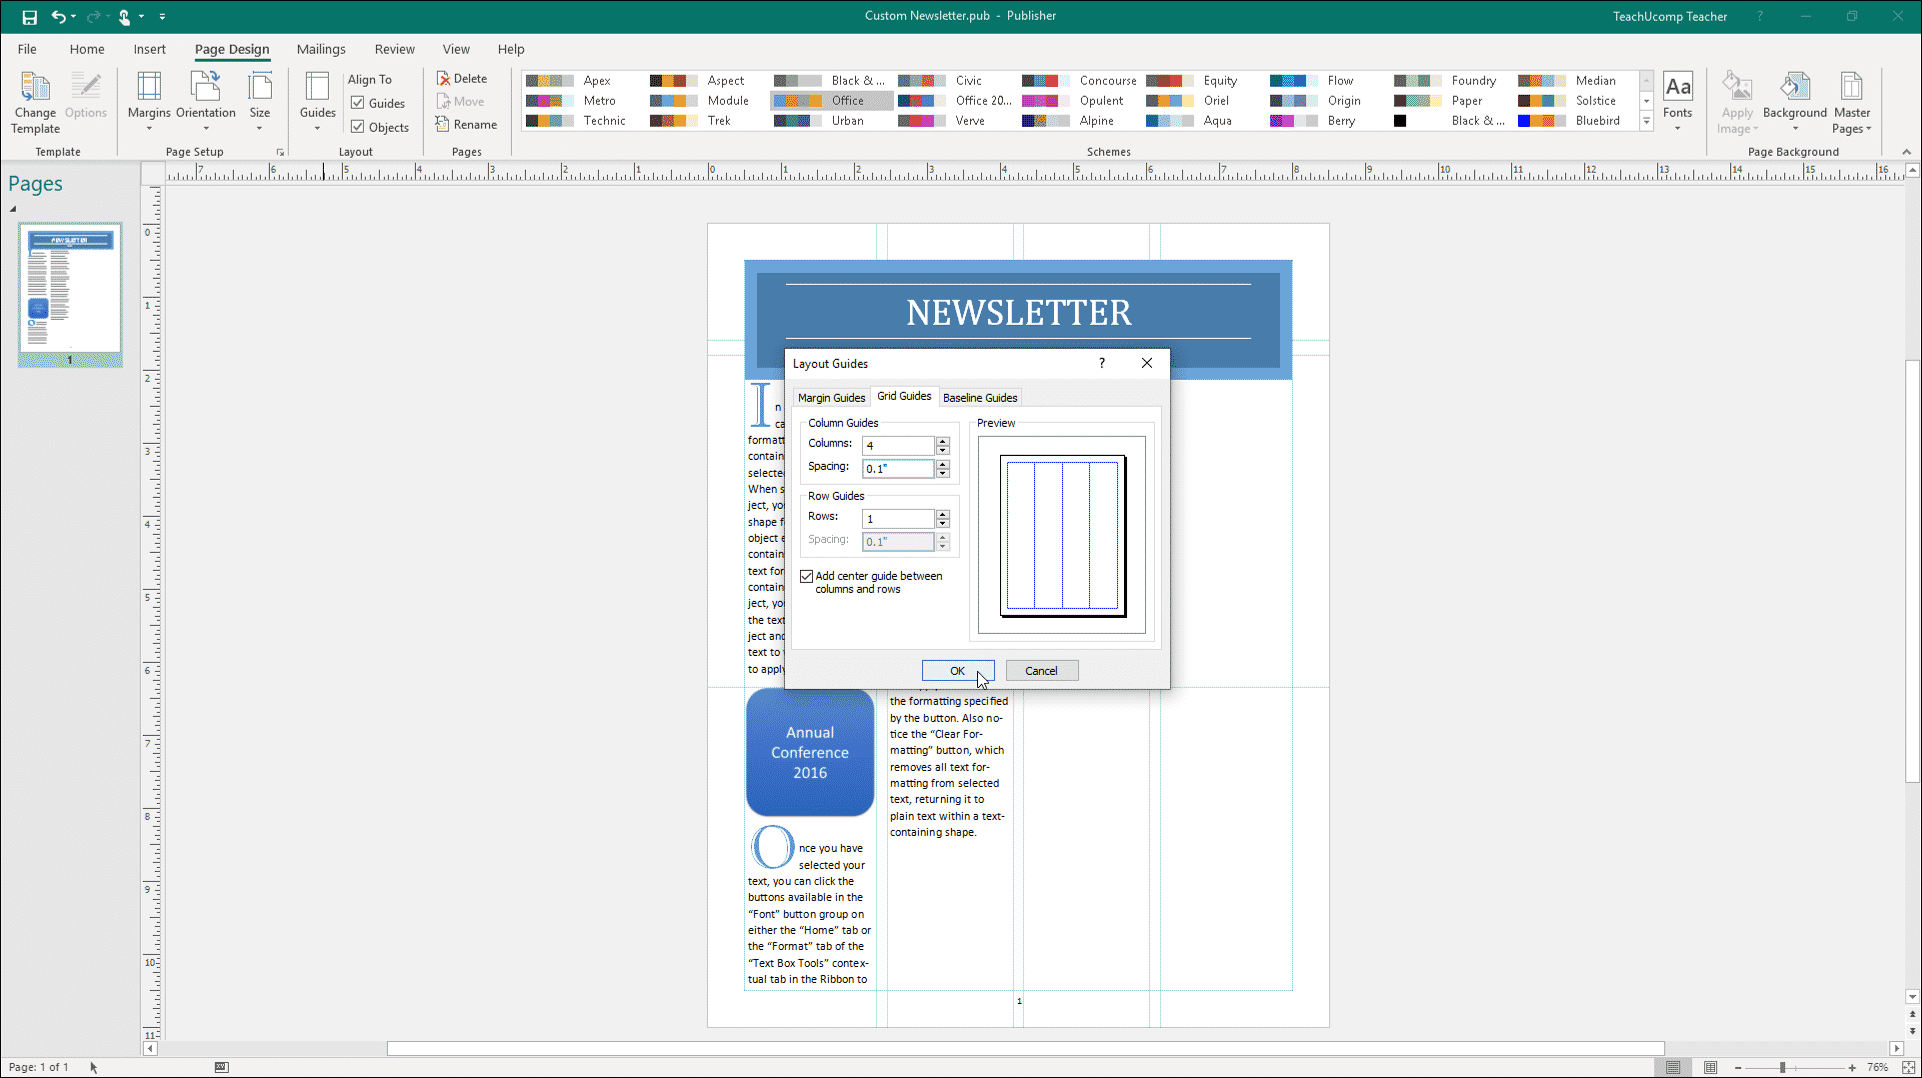 Newspaper Template For Word 2013 from www.teachucomp.com